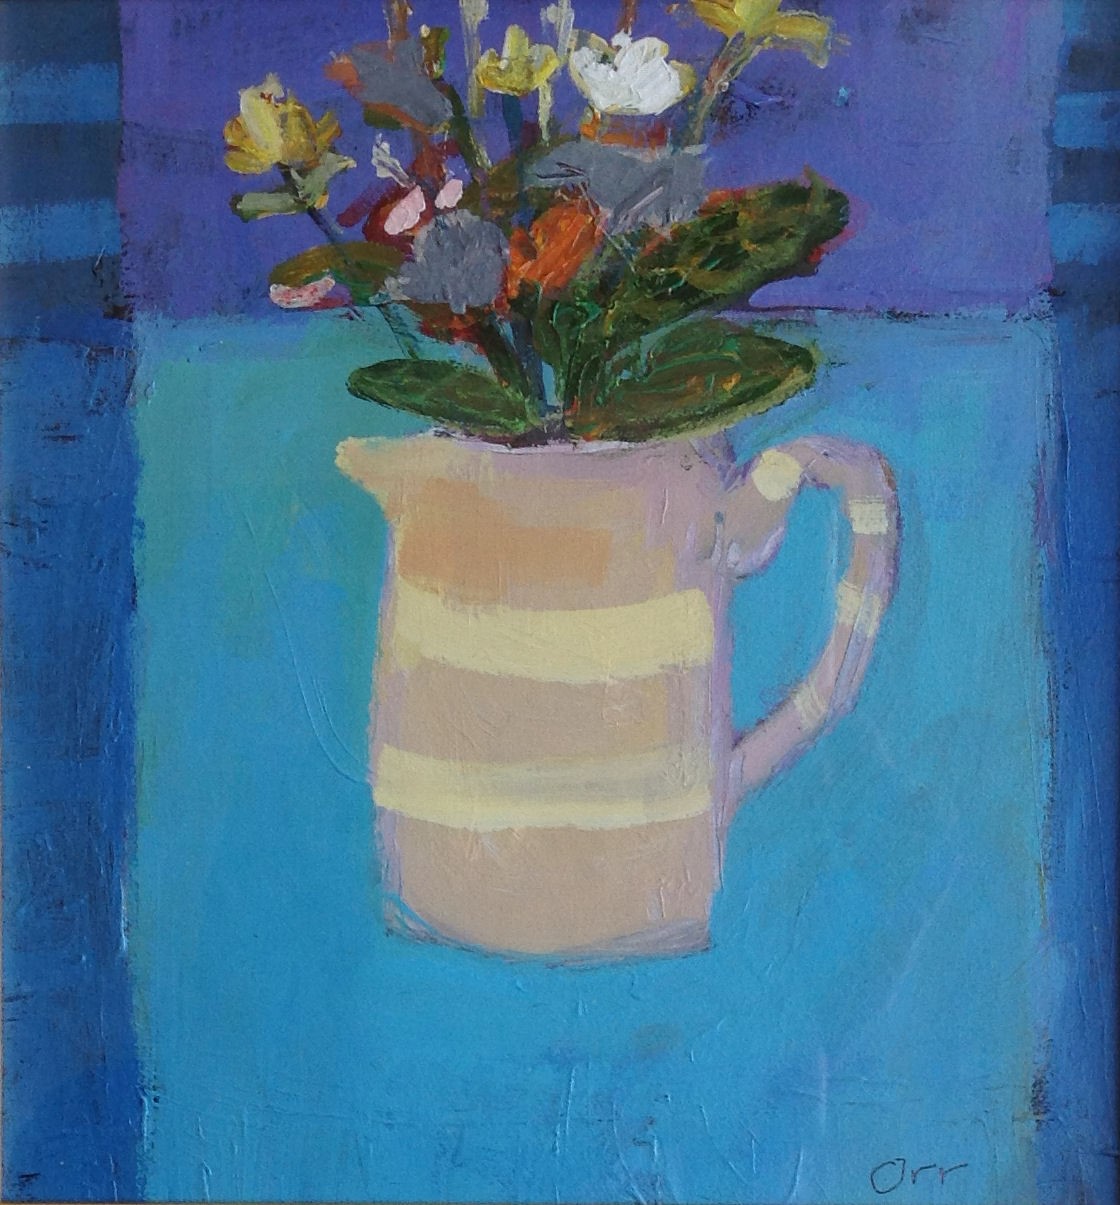 'Stripey Jug and Flowers' by artist Kevin Hutchison-Orr